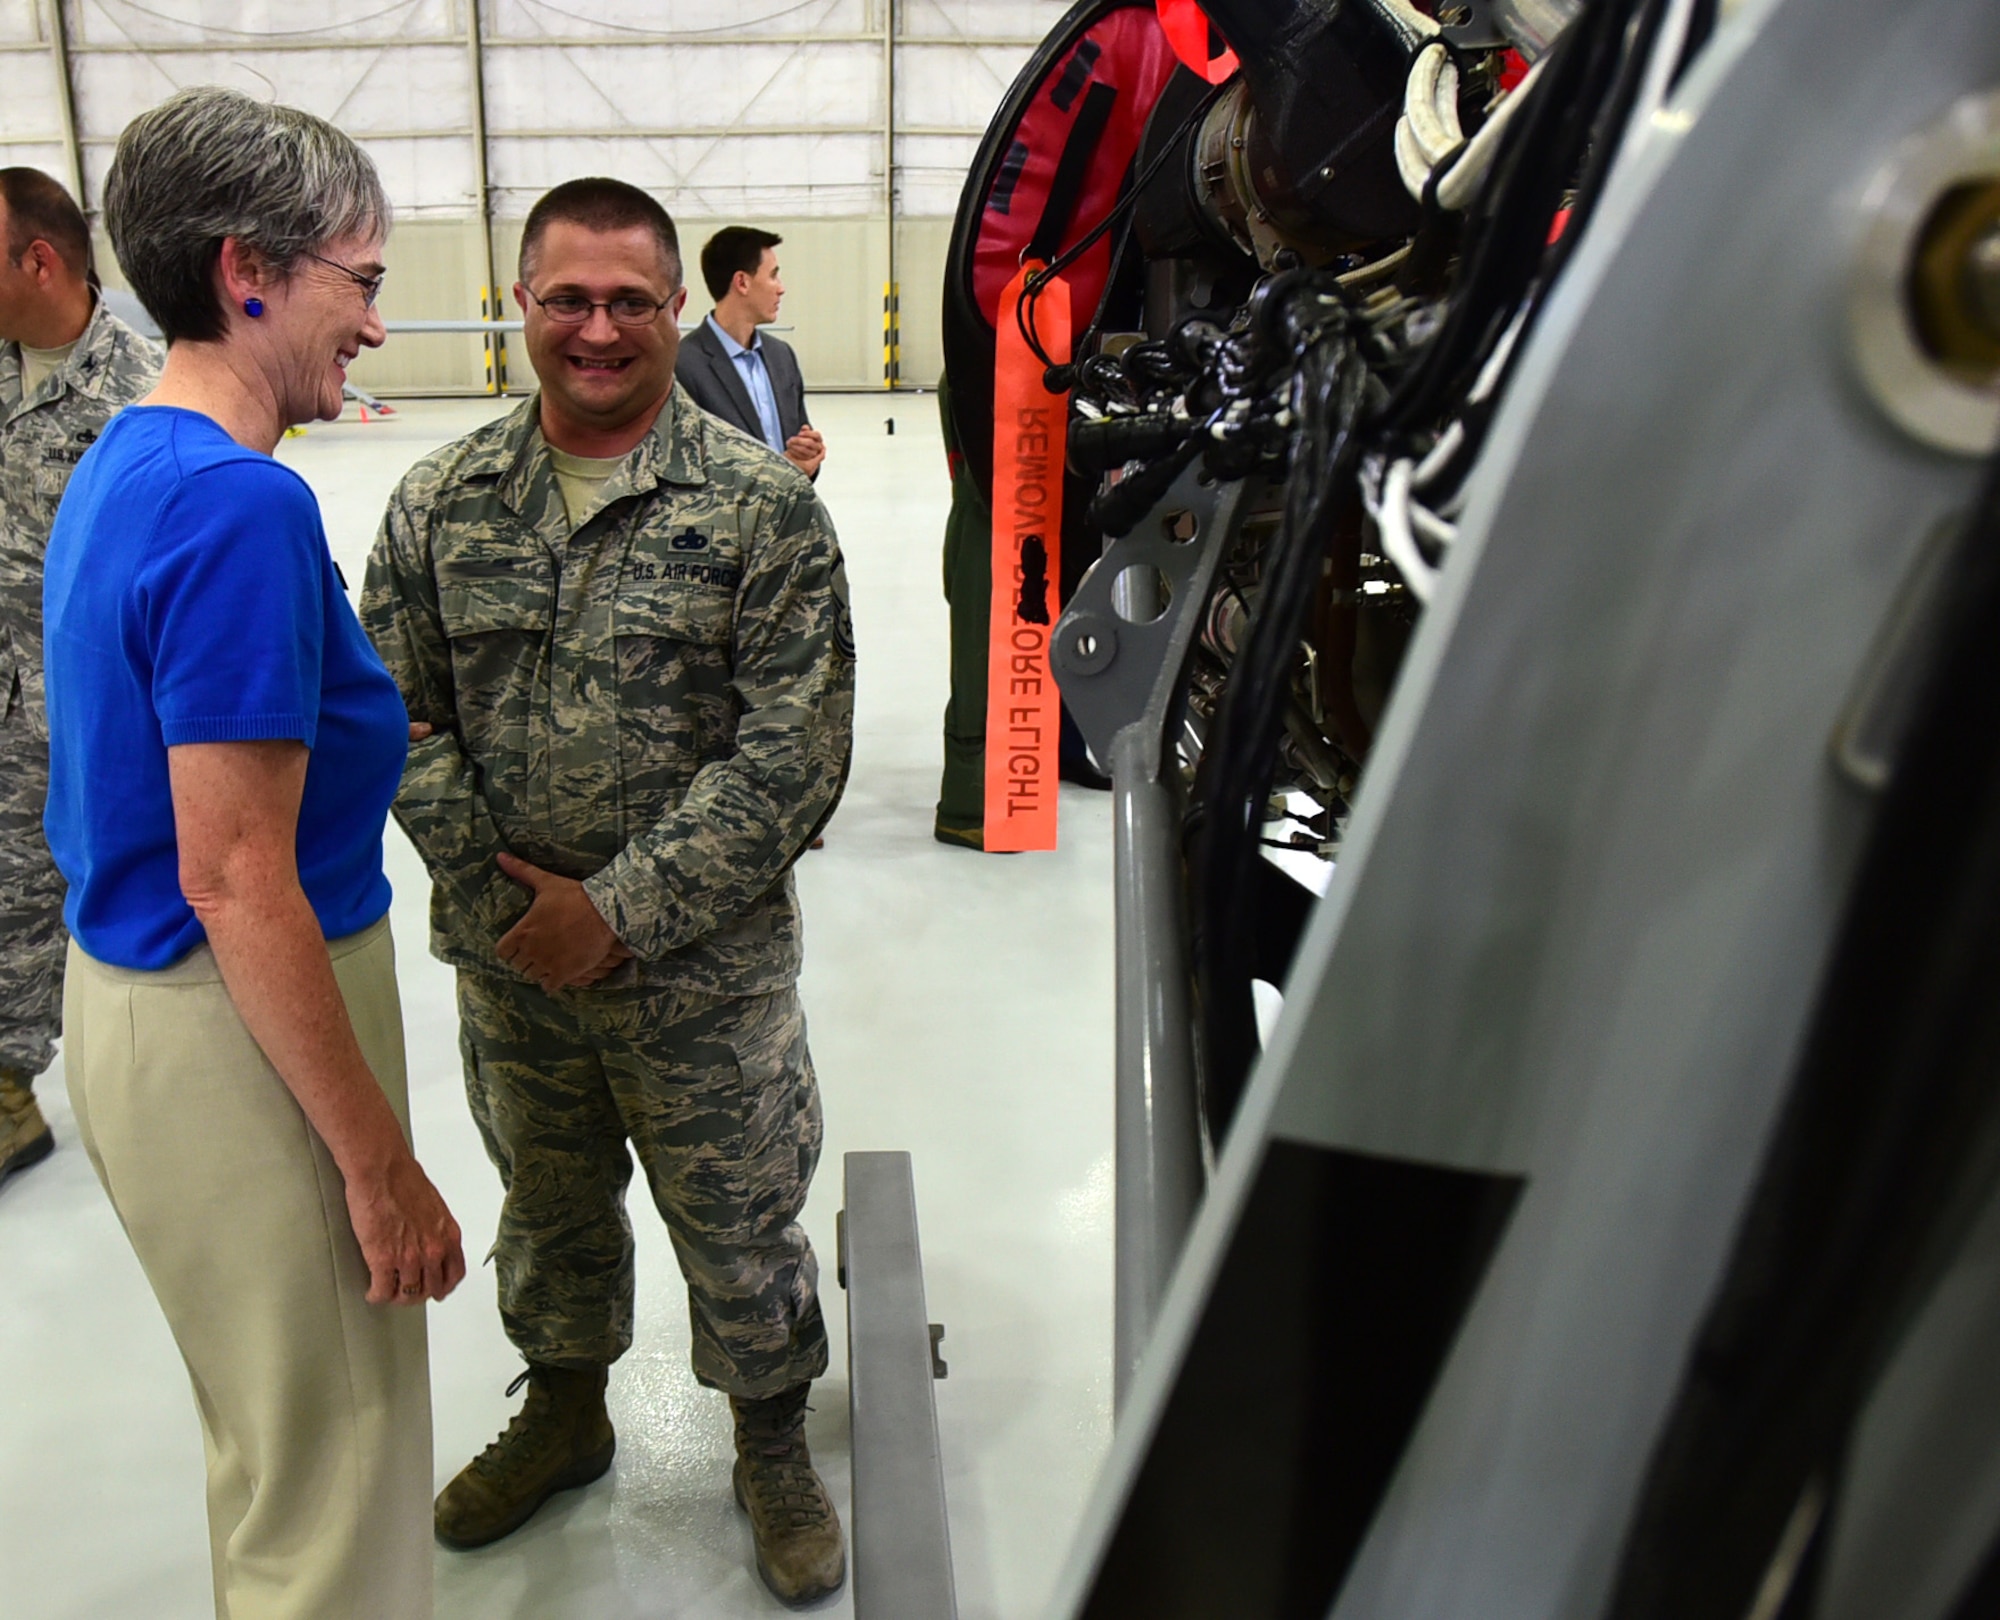 Secretary of the Air Force Heather Wilson shares a laugh with Master Sgt. Eric, 432nd Aircraft Maintenance Squadron production superintendent, July 19, 2017, at Creech Air Force Base, Nev. Eric briefed the SecAF on an engine trainer he created in his spare time to fill a training need within the squadron. He said it was a unique opportunity to show her his creation. (U.S. Air Force photo/Senior Airman Christian Clausen)